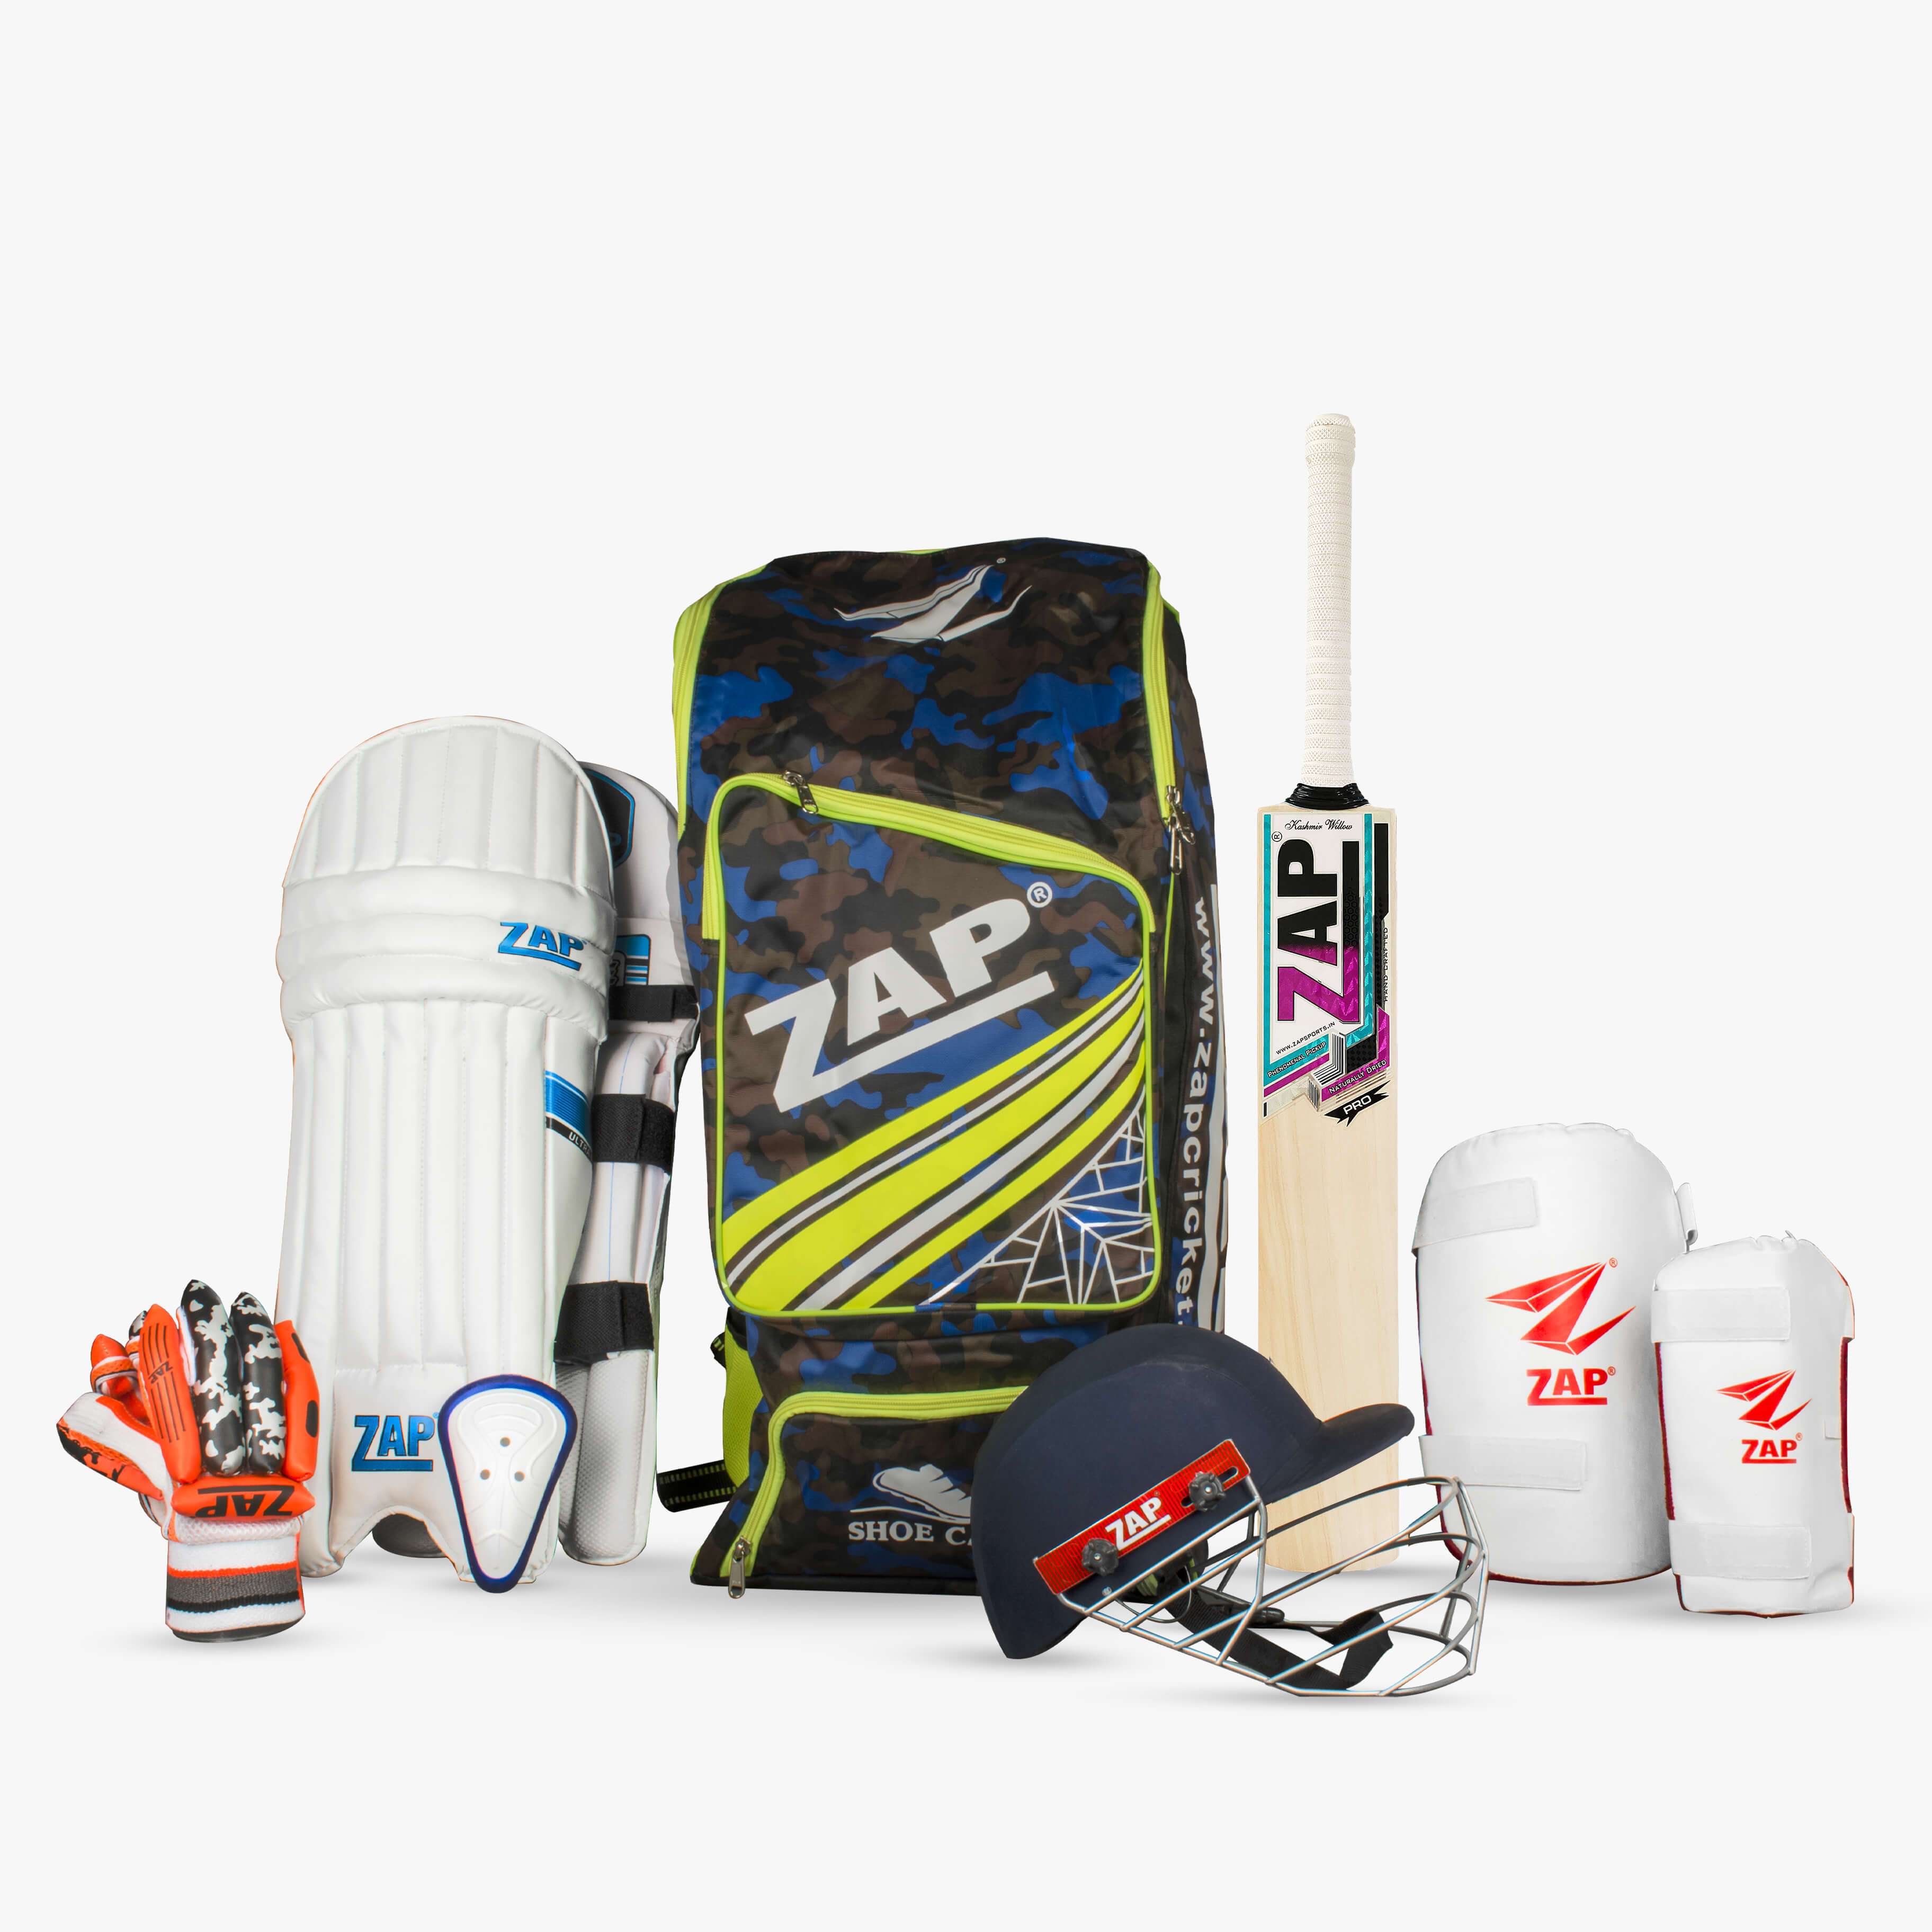 What's in Hinders Cricket Kit Bag?